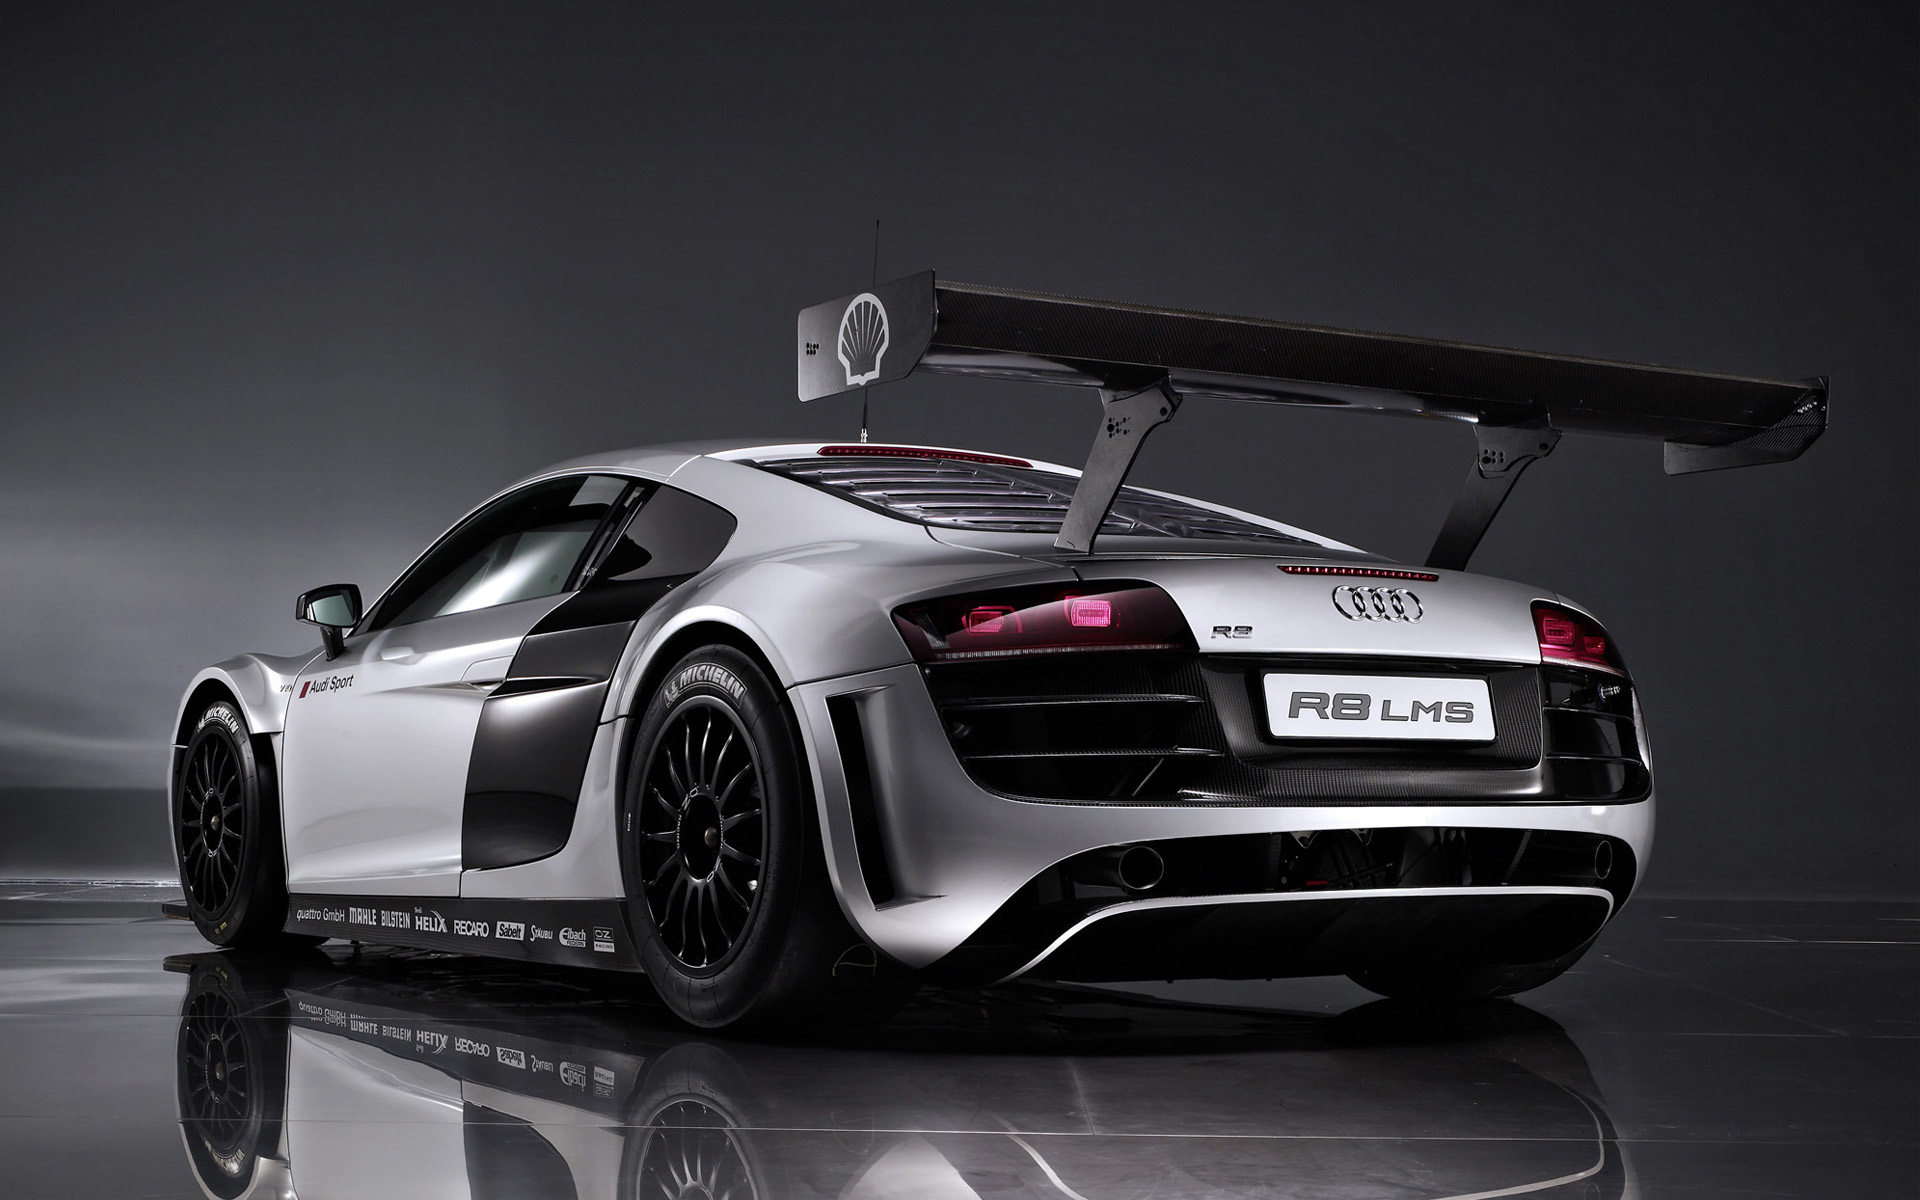 2010 Audi R8 LMS Wallpapers HD Wallpapers 1920x1200